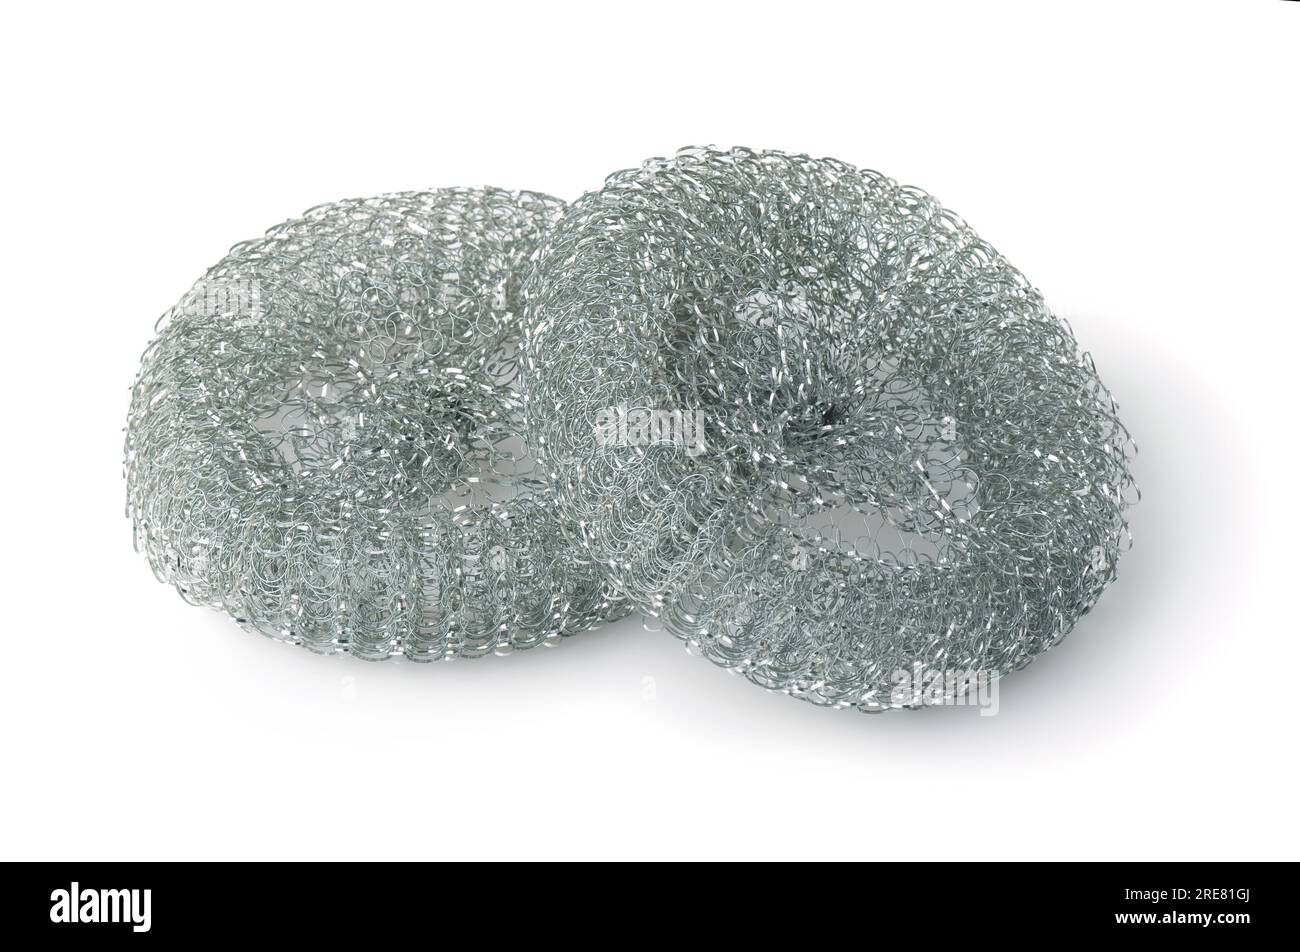 https://c8.alamy.com/comp/2RE81GJ/two-stainless-steel-wire-mesh-kitchen-scrubbers-isolated-on-white-2RE81GJ.jpg